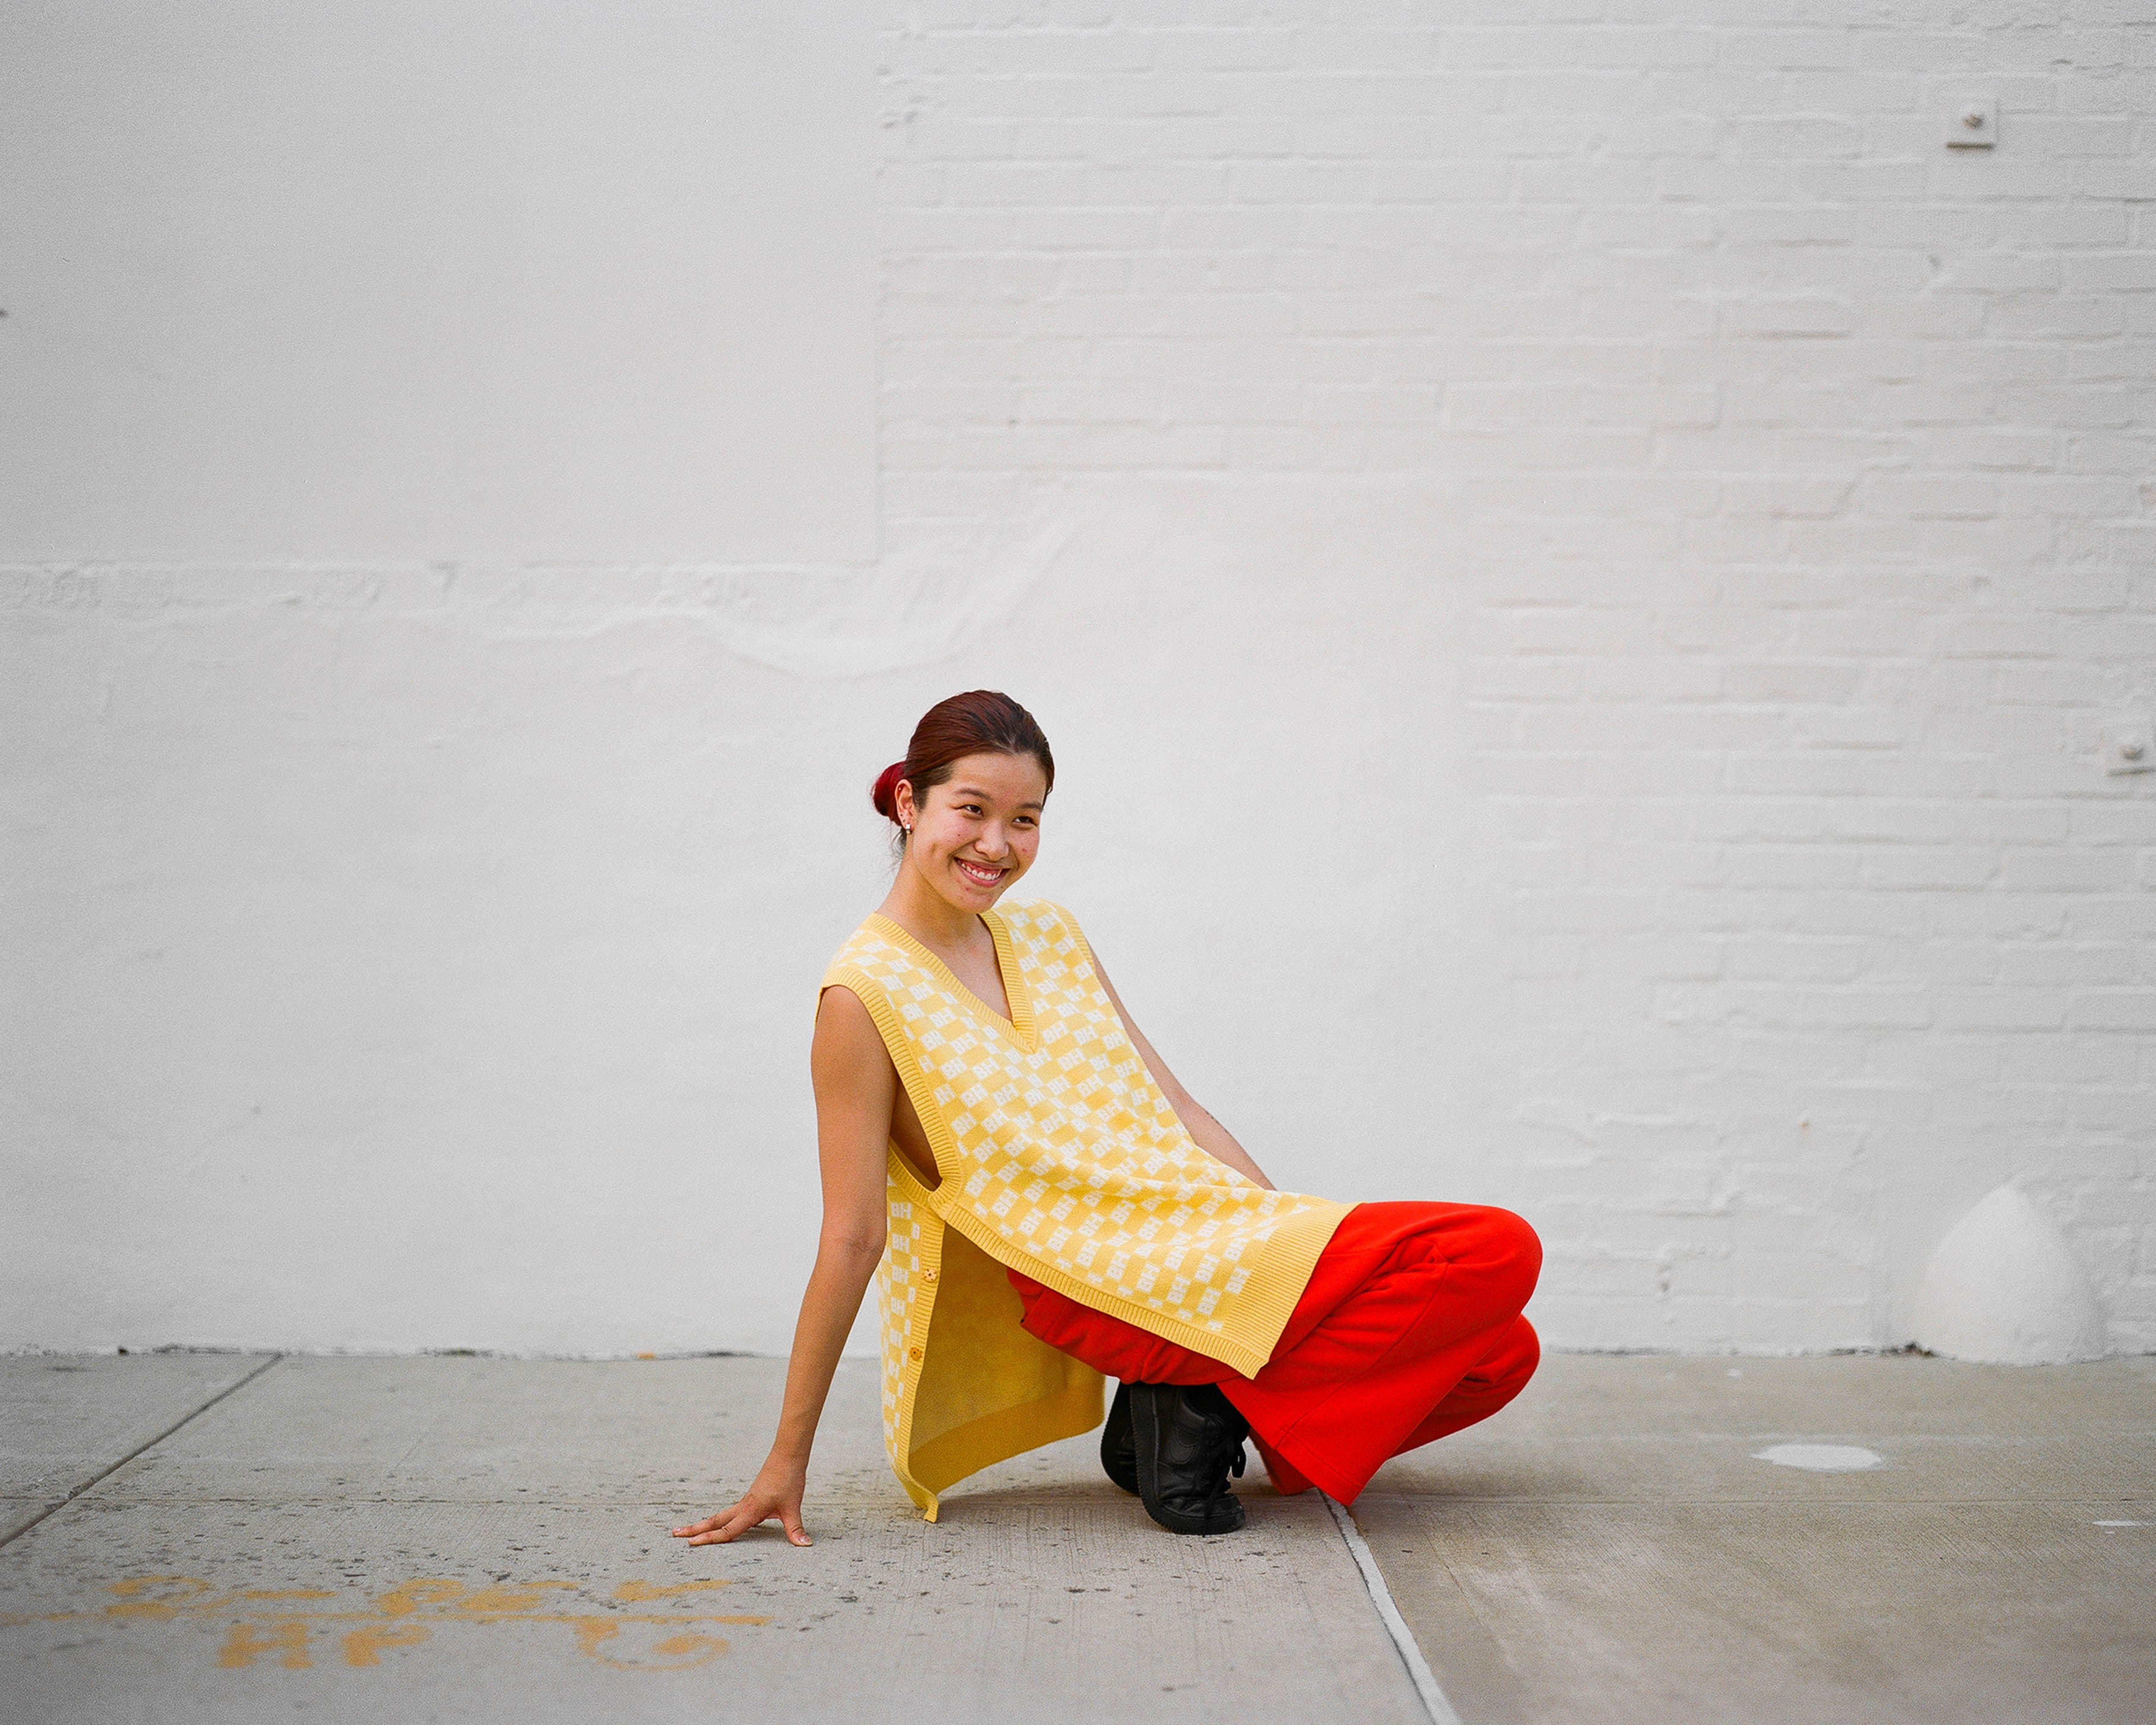 Yellow Feather Skirt - Barefoot Campus Outfitter